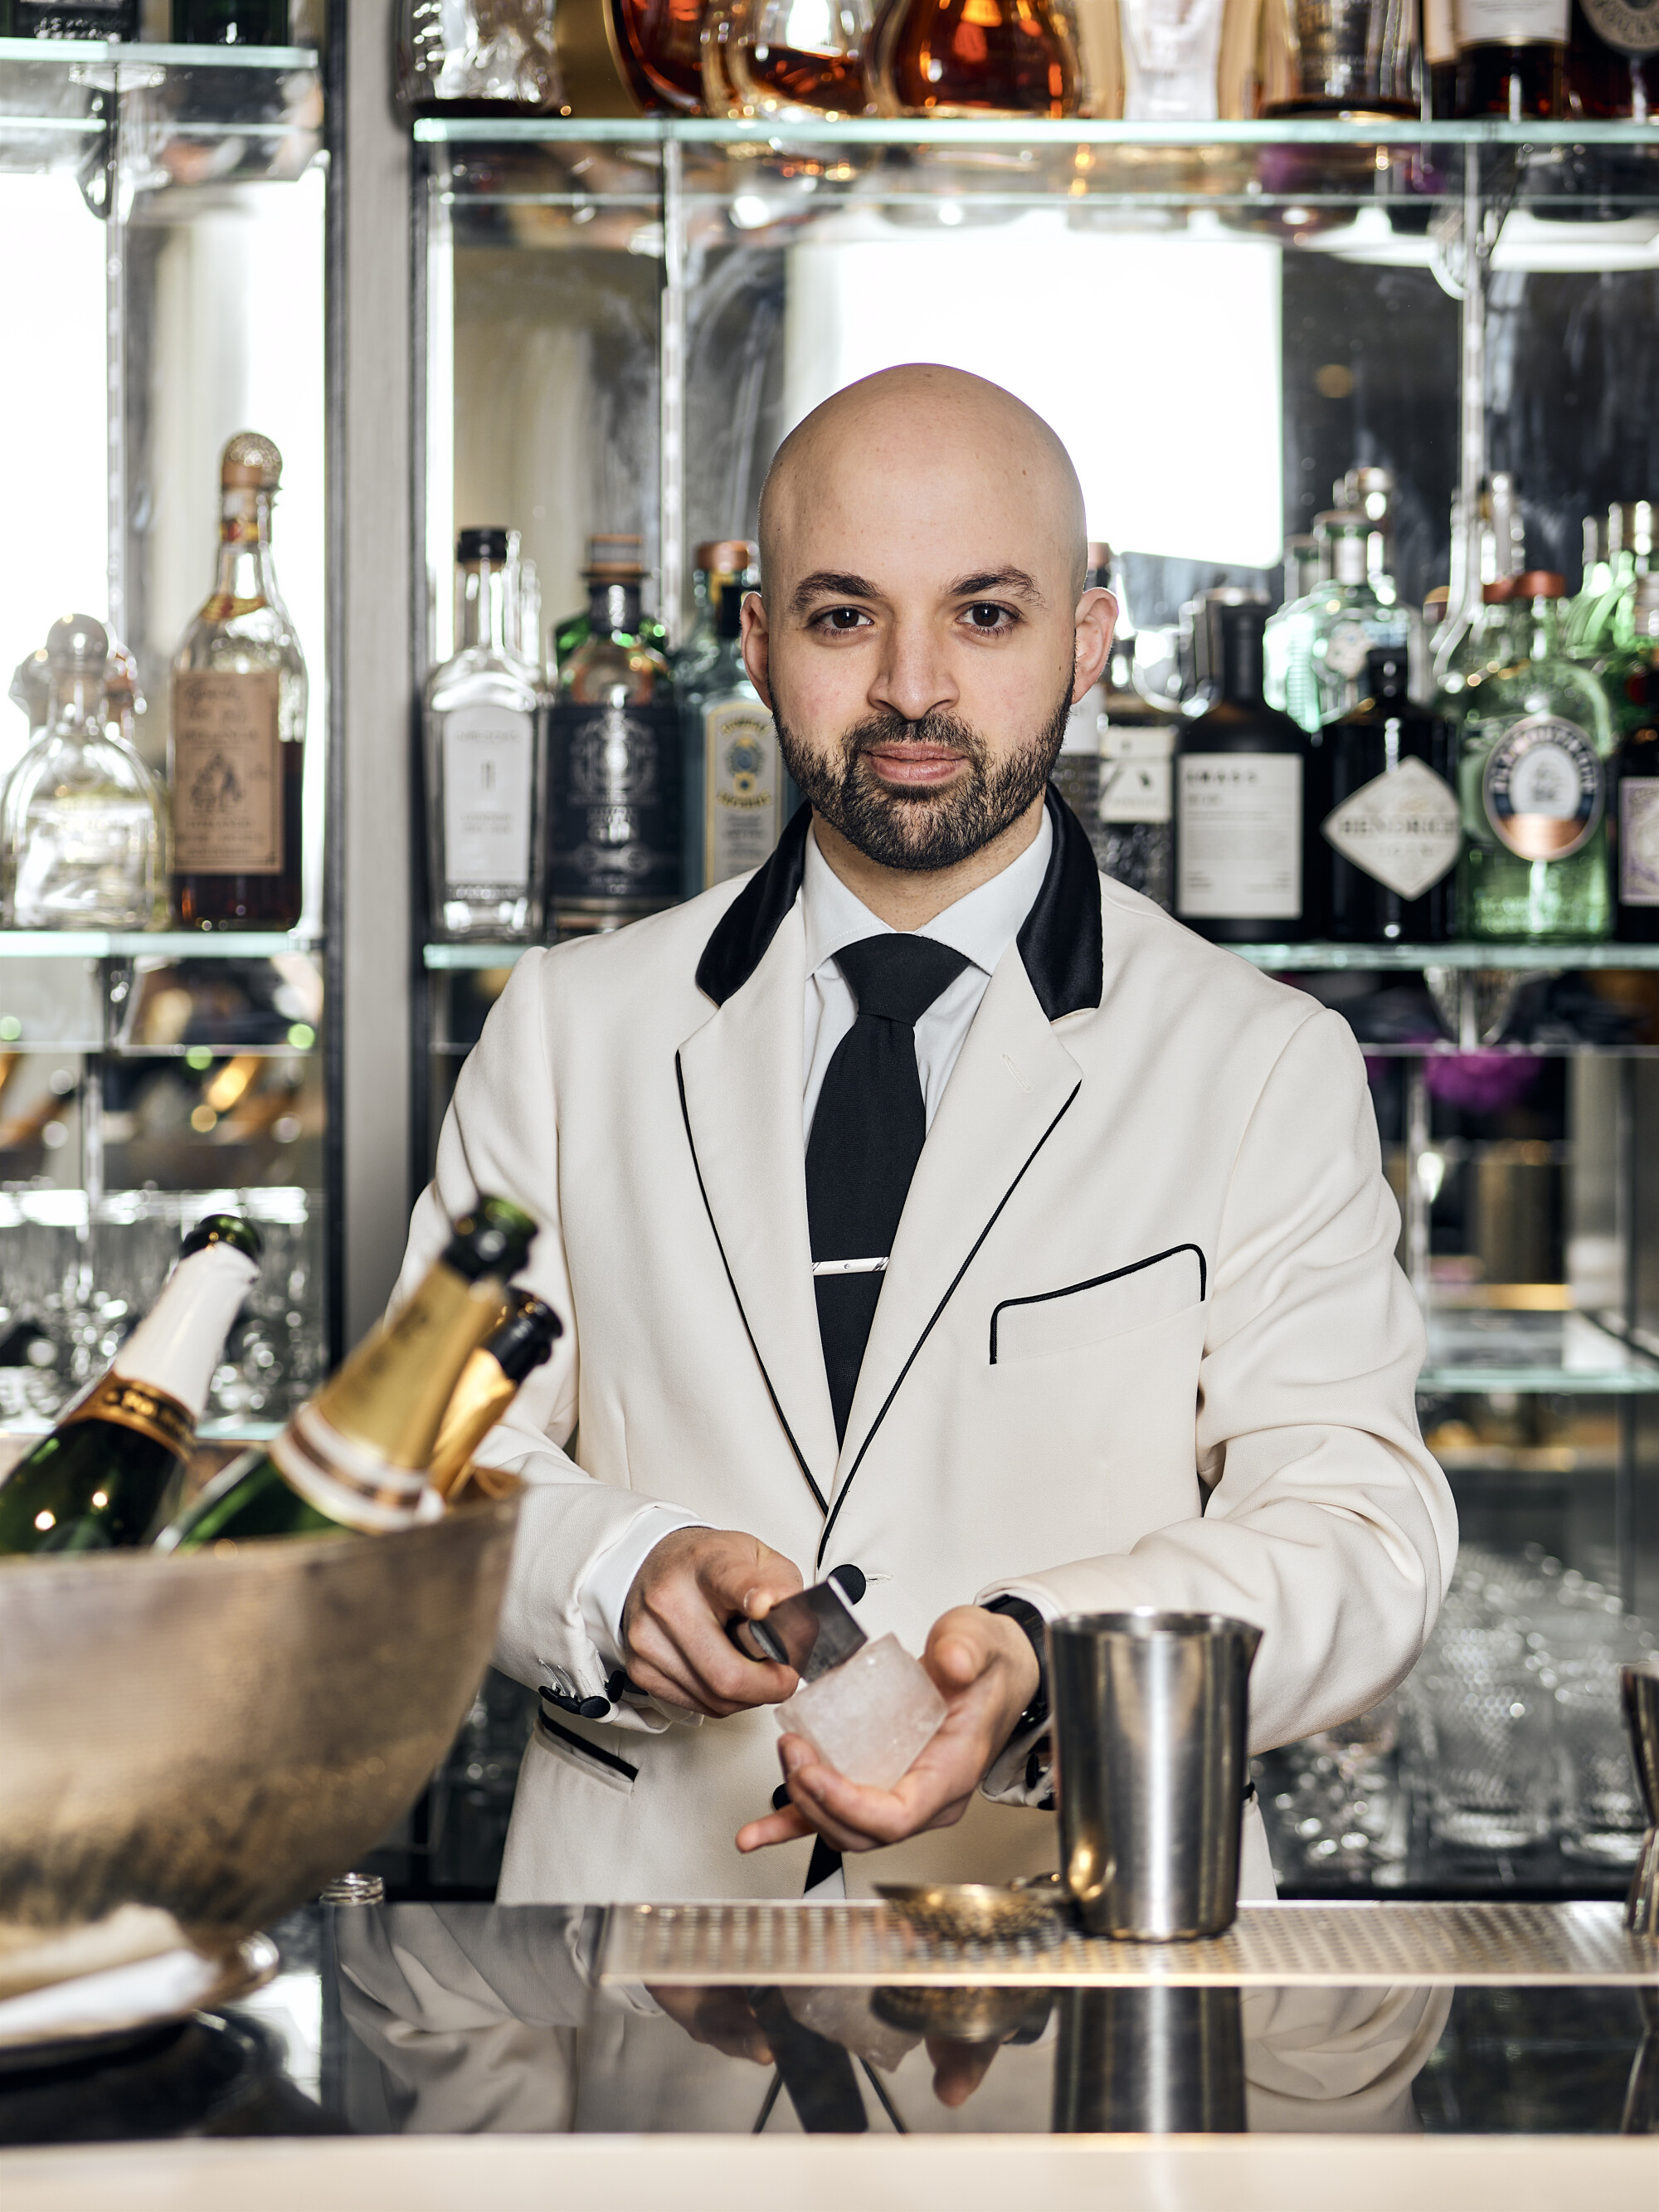 The Savoy Appoints New F&B Director and Head Bartender for the American Bar 